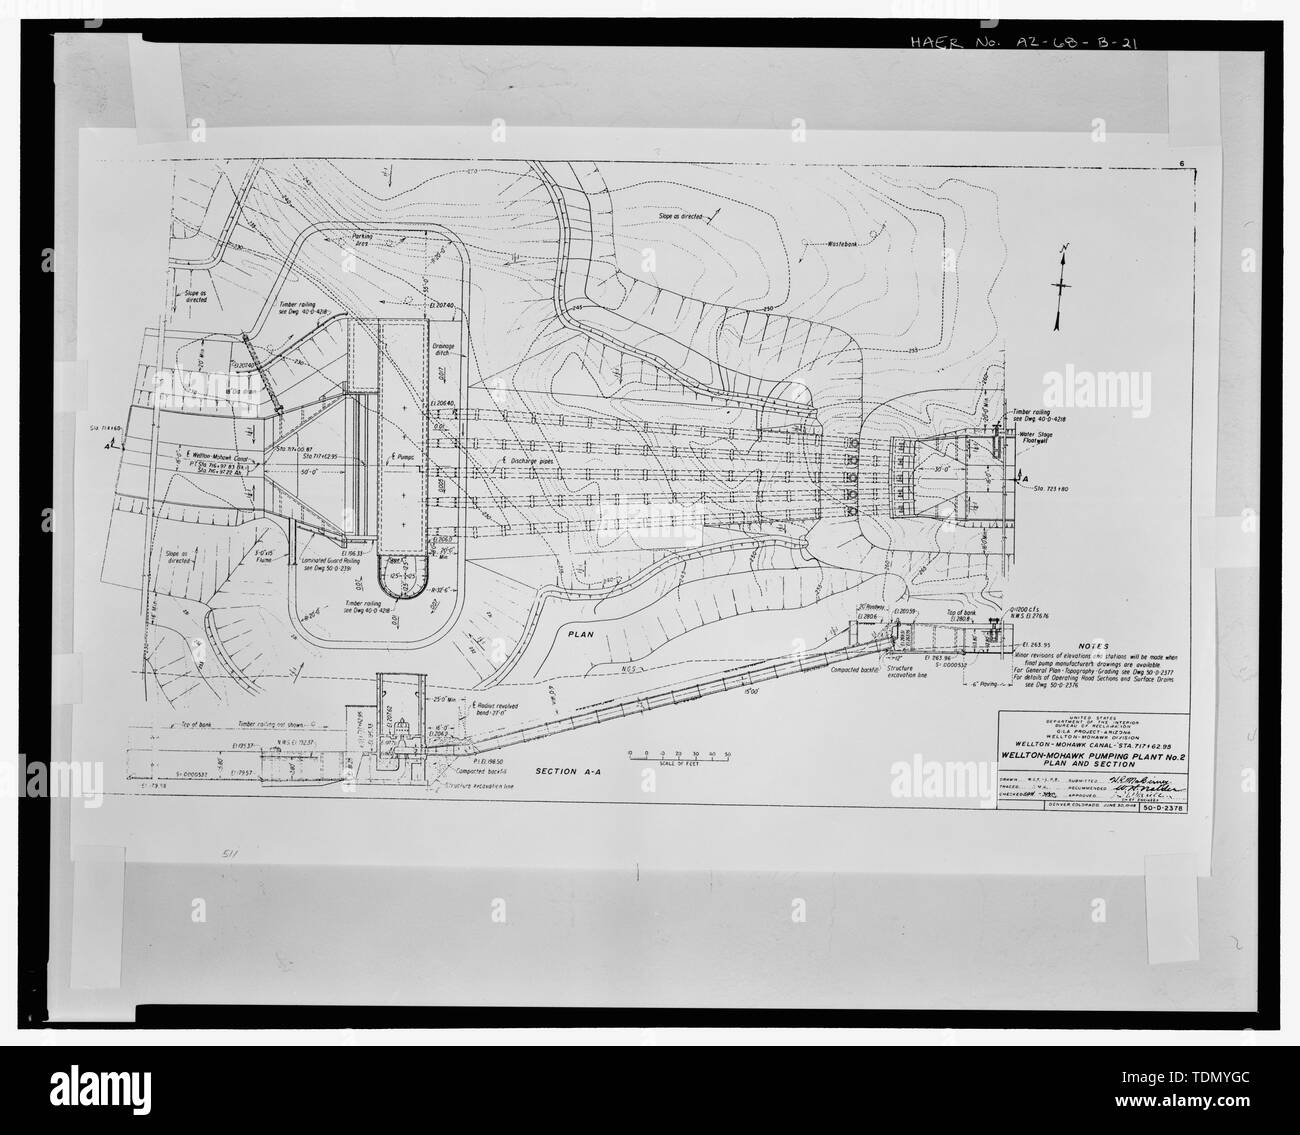 PLAN AND SECTION, WELLTON-MOHAWK PUMPING PLANT NO. 2. WELLTON-MOHAWK CANAL - STA. 717+62.95. United States Department of the Interior, Bureau of Reclamation; Gila Project, Arizona, Wellton-Mohawk Division. Drawing No. 50-D-2378, dated June 30, 1948, Denver Colorado - Wellton-Mohawk Irrigation System, Pumping Plant No. 2, Bounded by Interstate 8 to south, Wellton, Yuma County, AZ Stock Photo